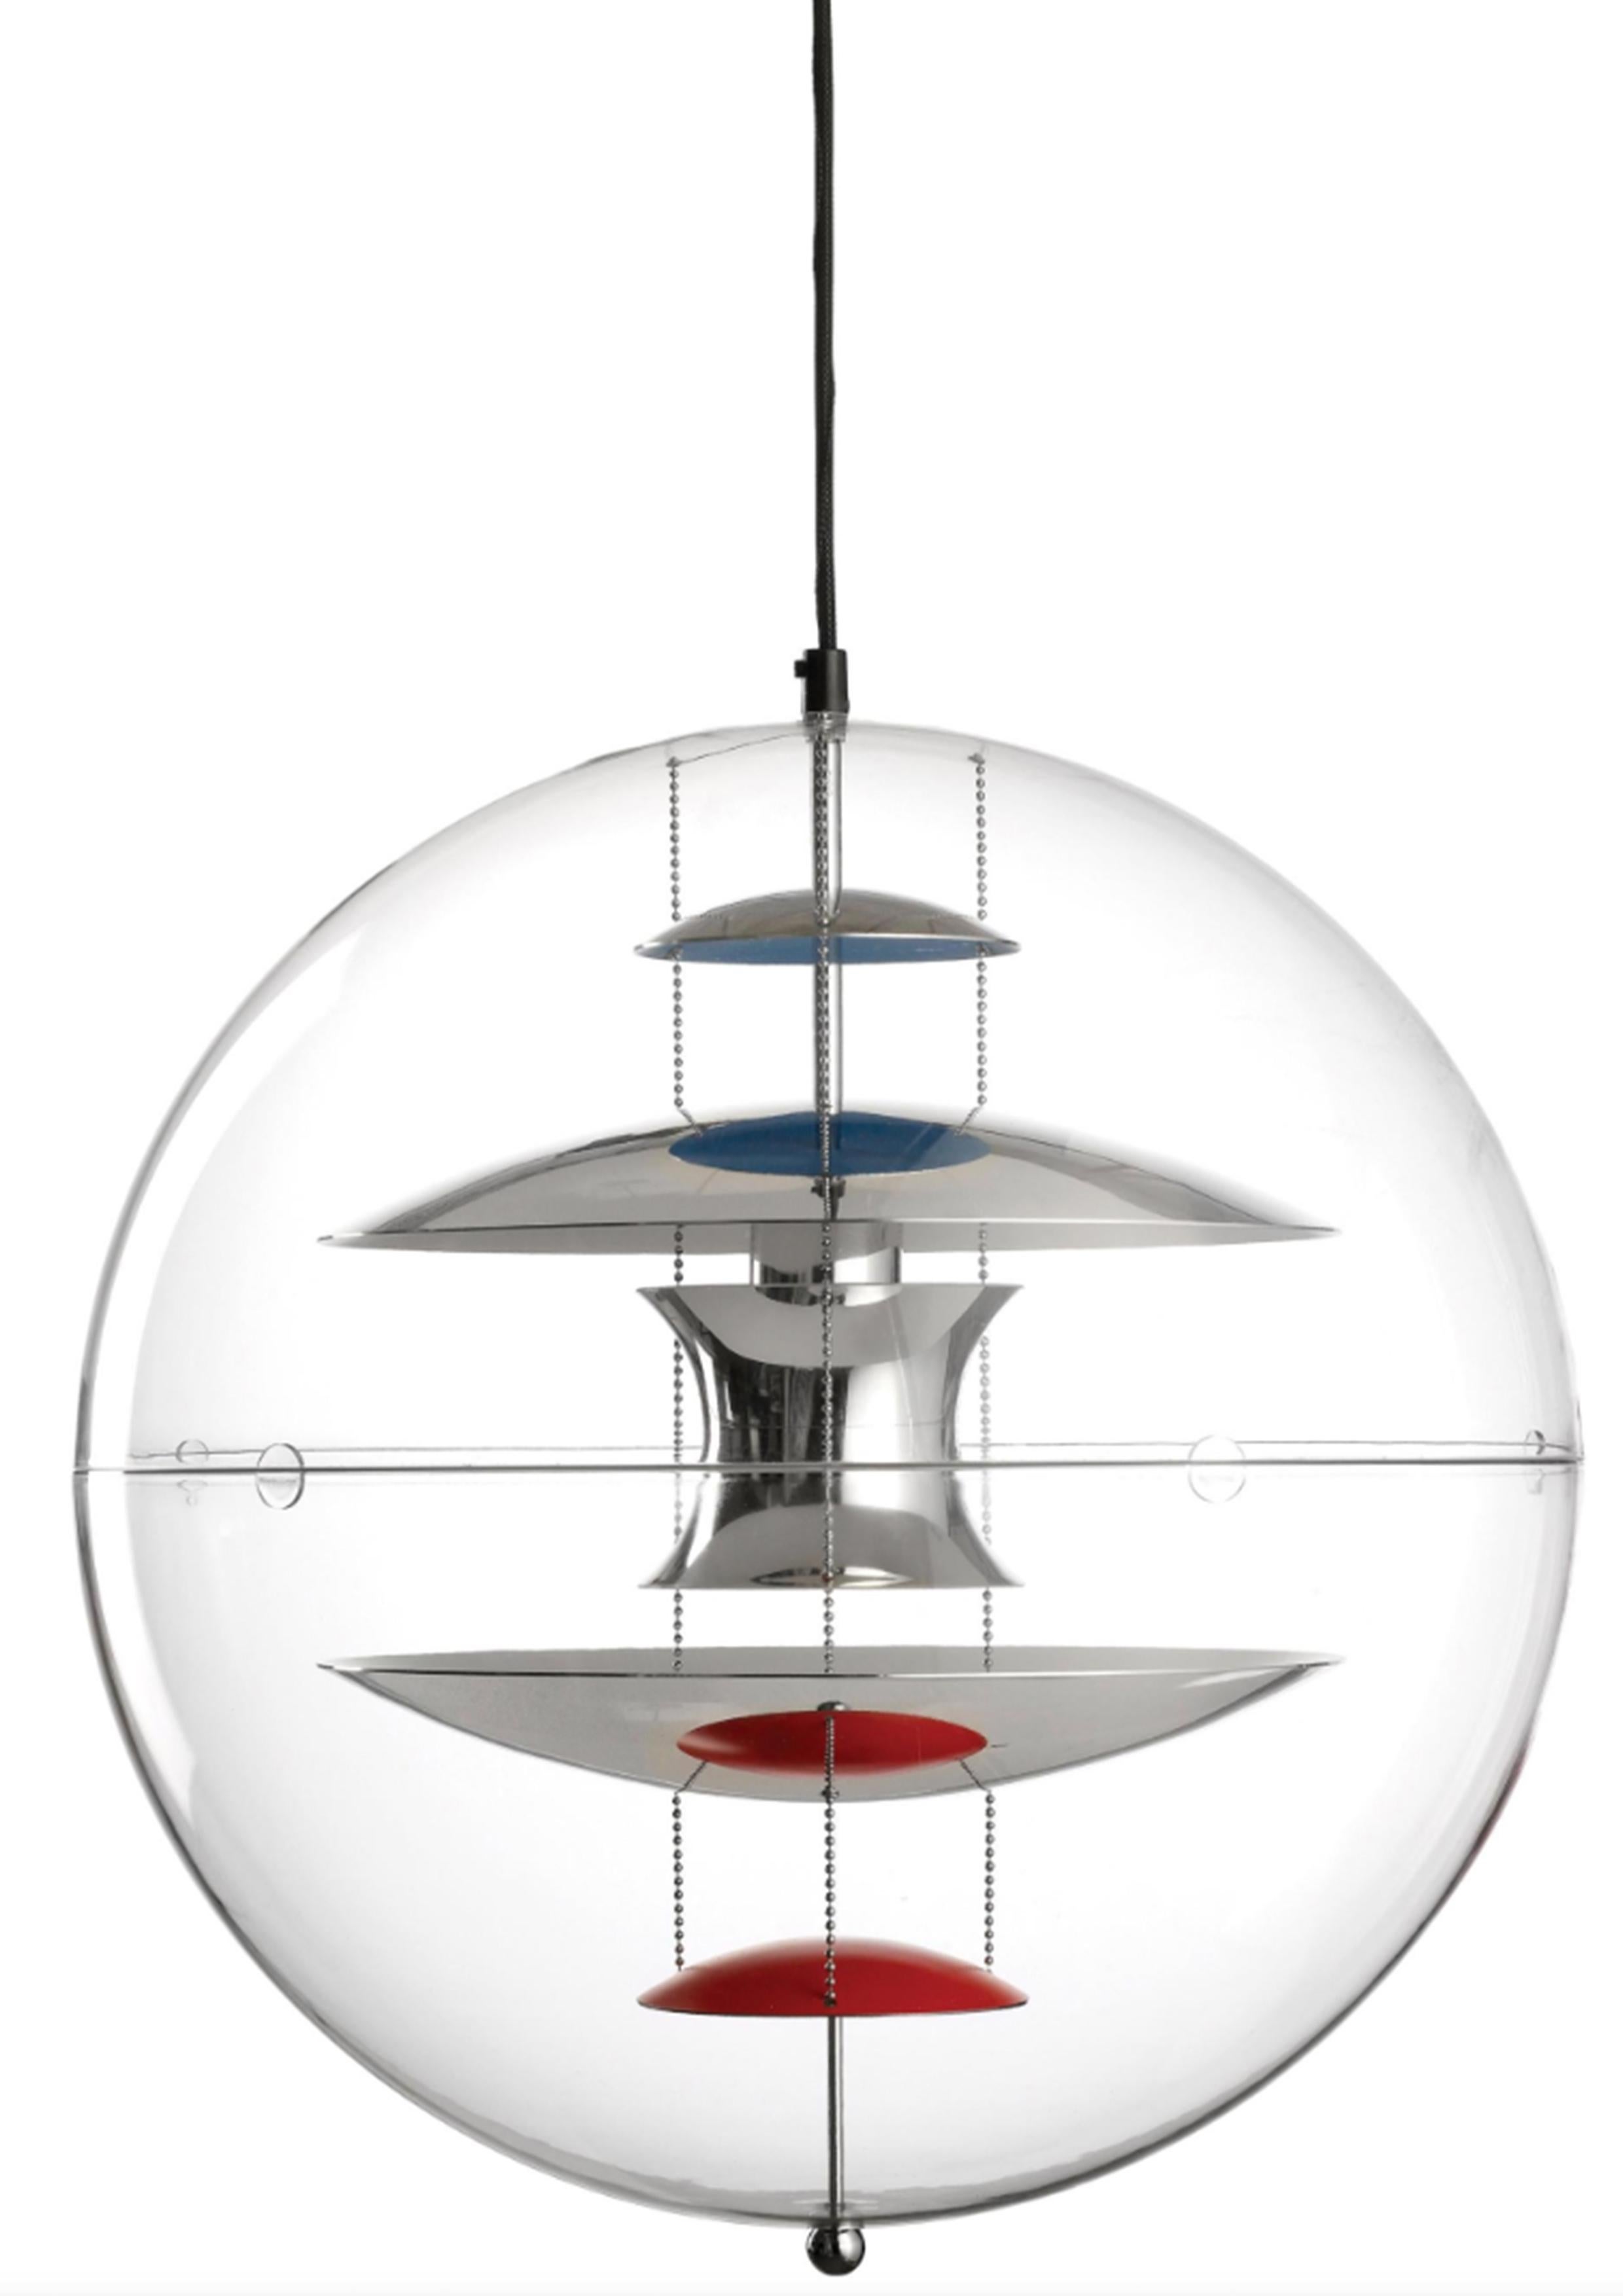 Verner Panton CS607 Lucite Ceiling Pendant Light by Frandsen Lighting A/S of Denmark 

Labelled to the interior and stamped 

Pendant made of transparent acrylic. 
Five reflectors inside. Suspended by three steel chains. Includes ceiling